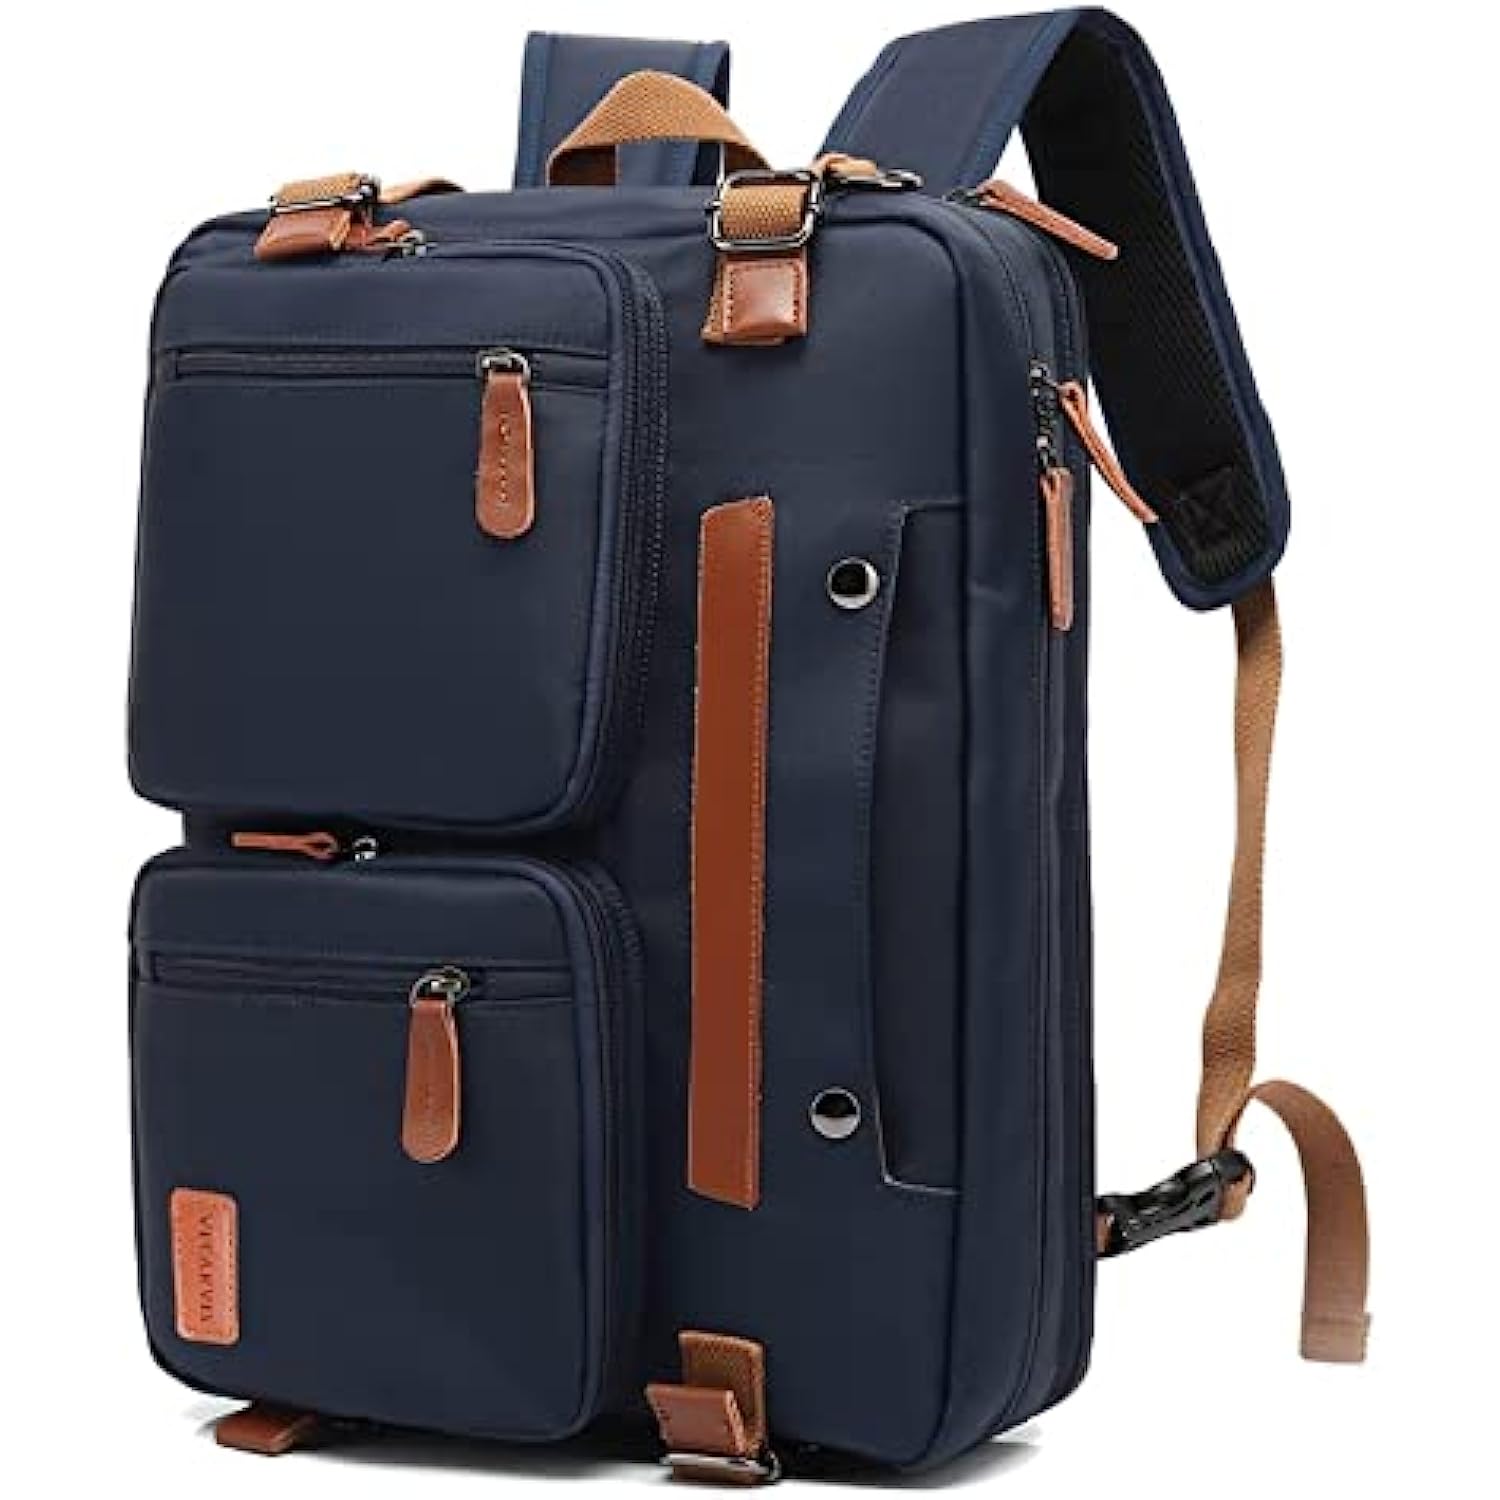 17.3 Inch Water-Proof Briefcase Multi-functional Notebook Computer Bag for Travel Business